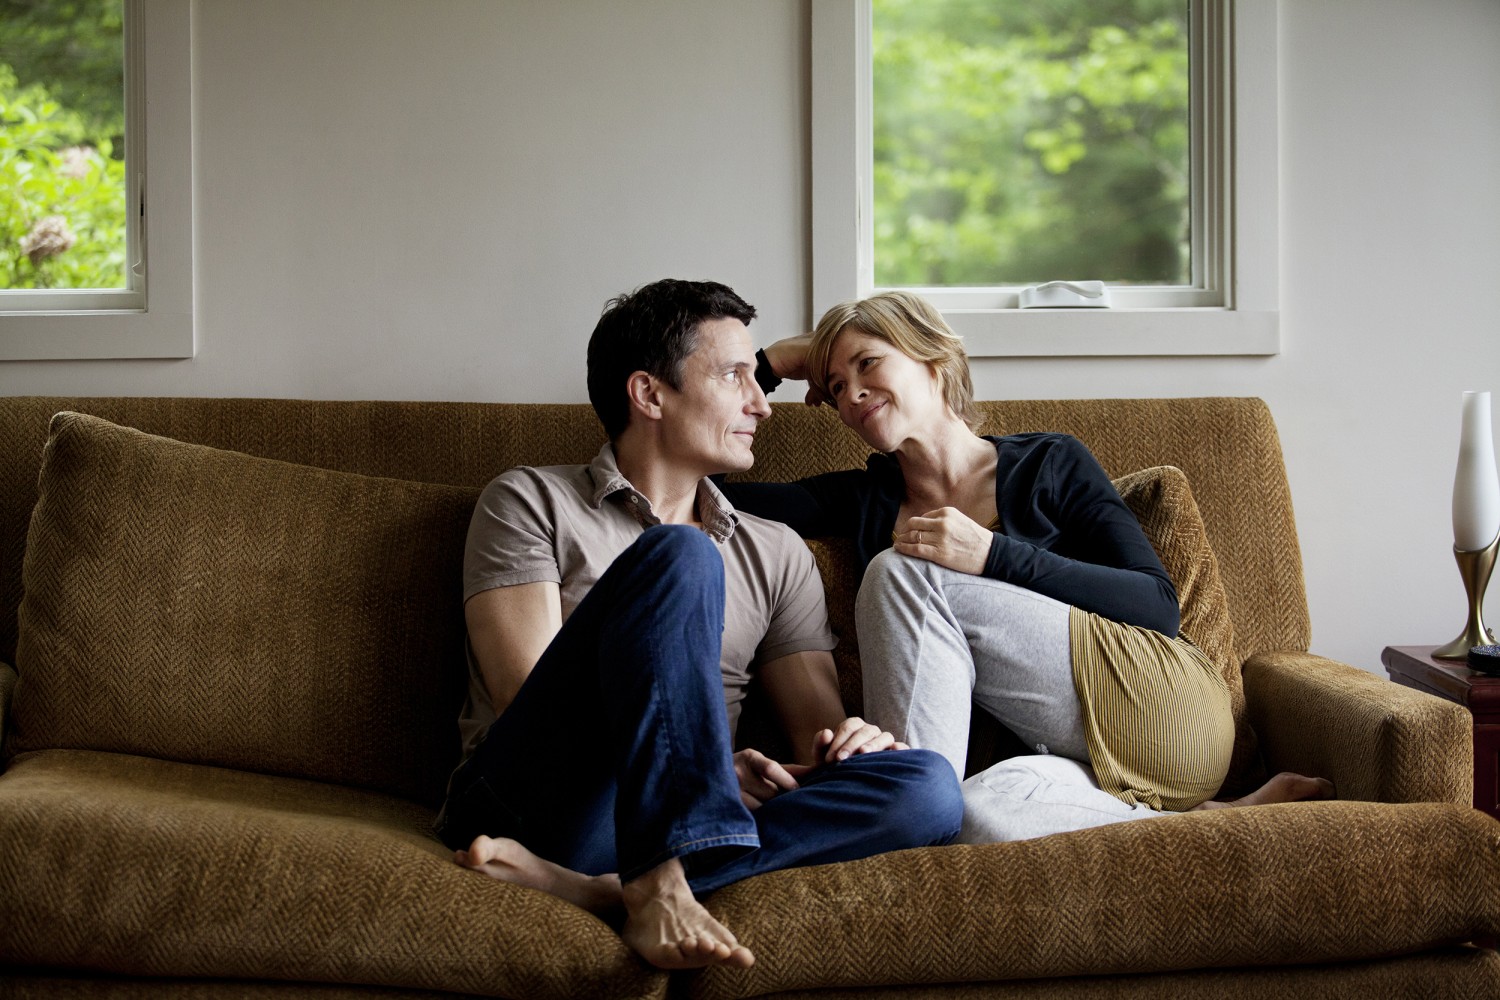 7 things to say to your spouse to deepen your connection pic